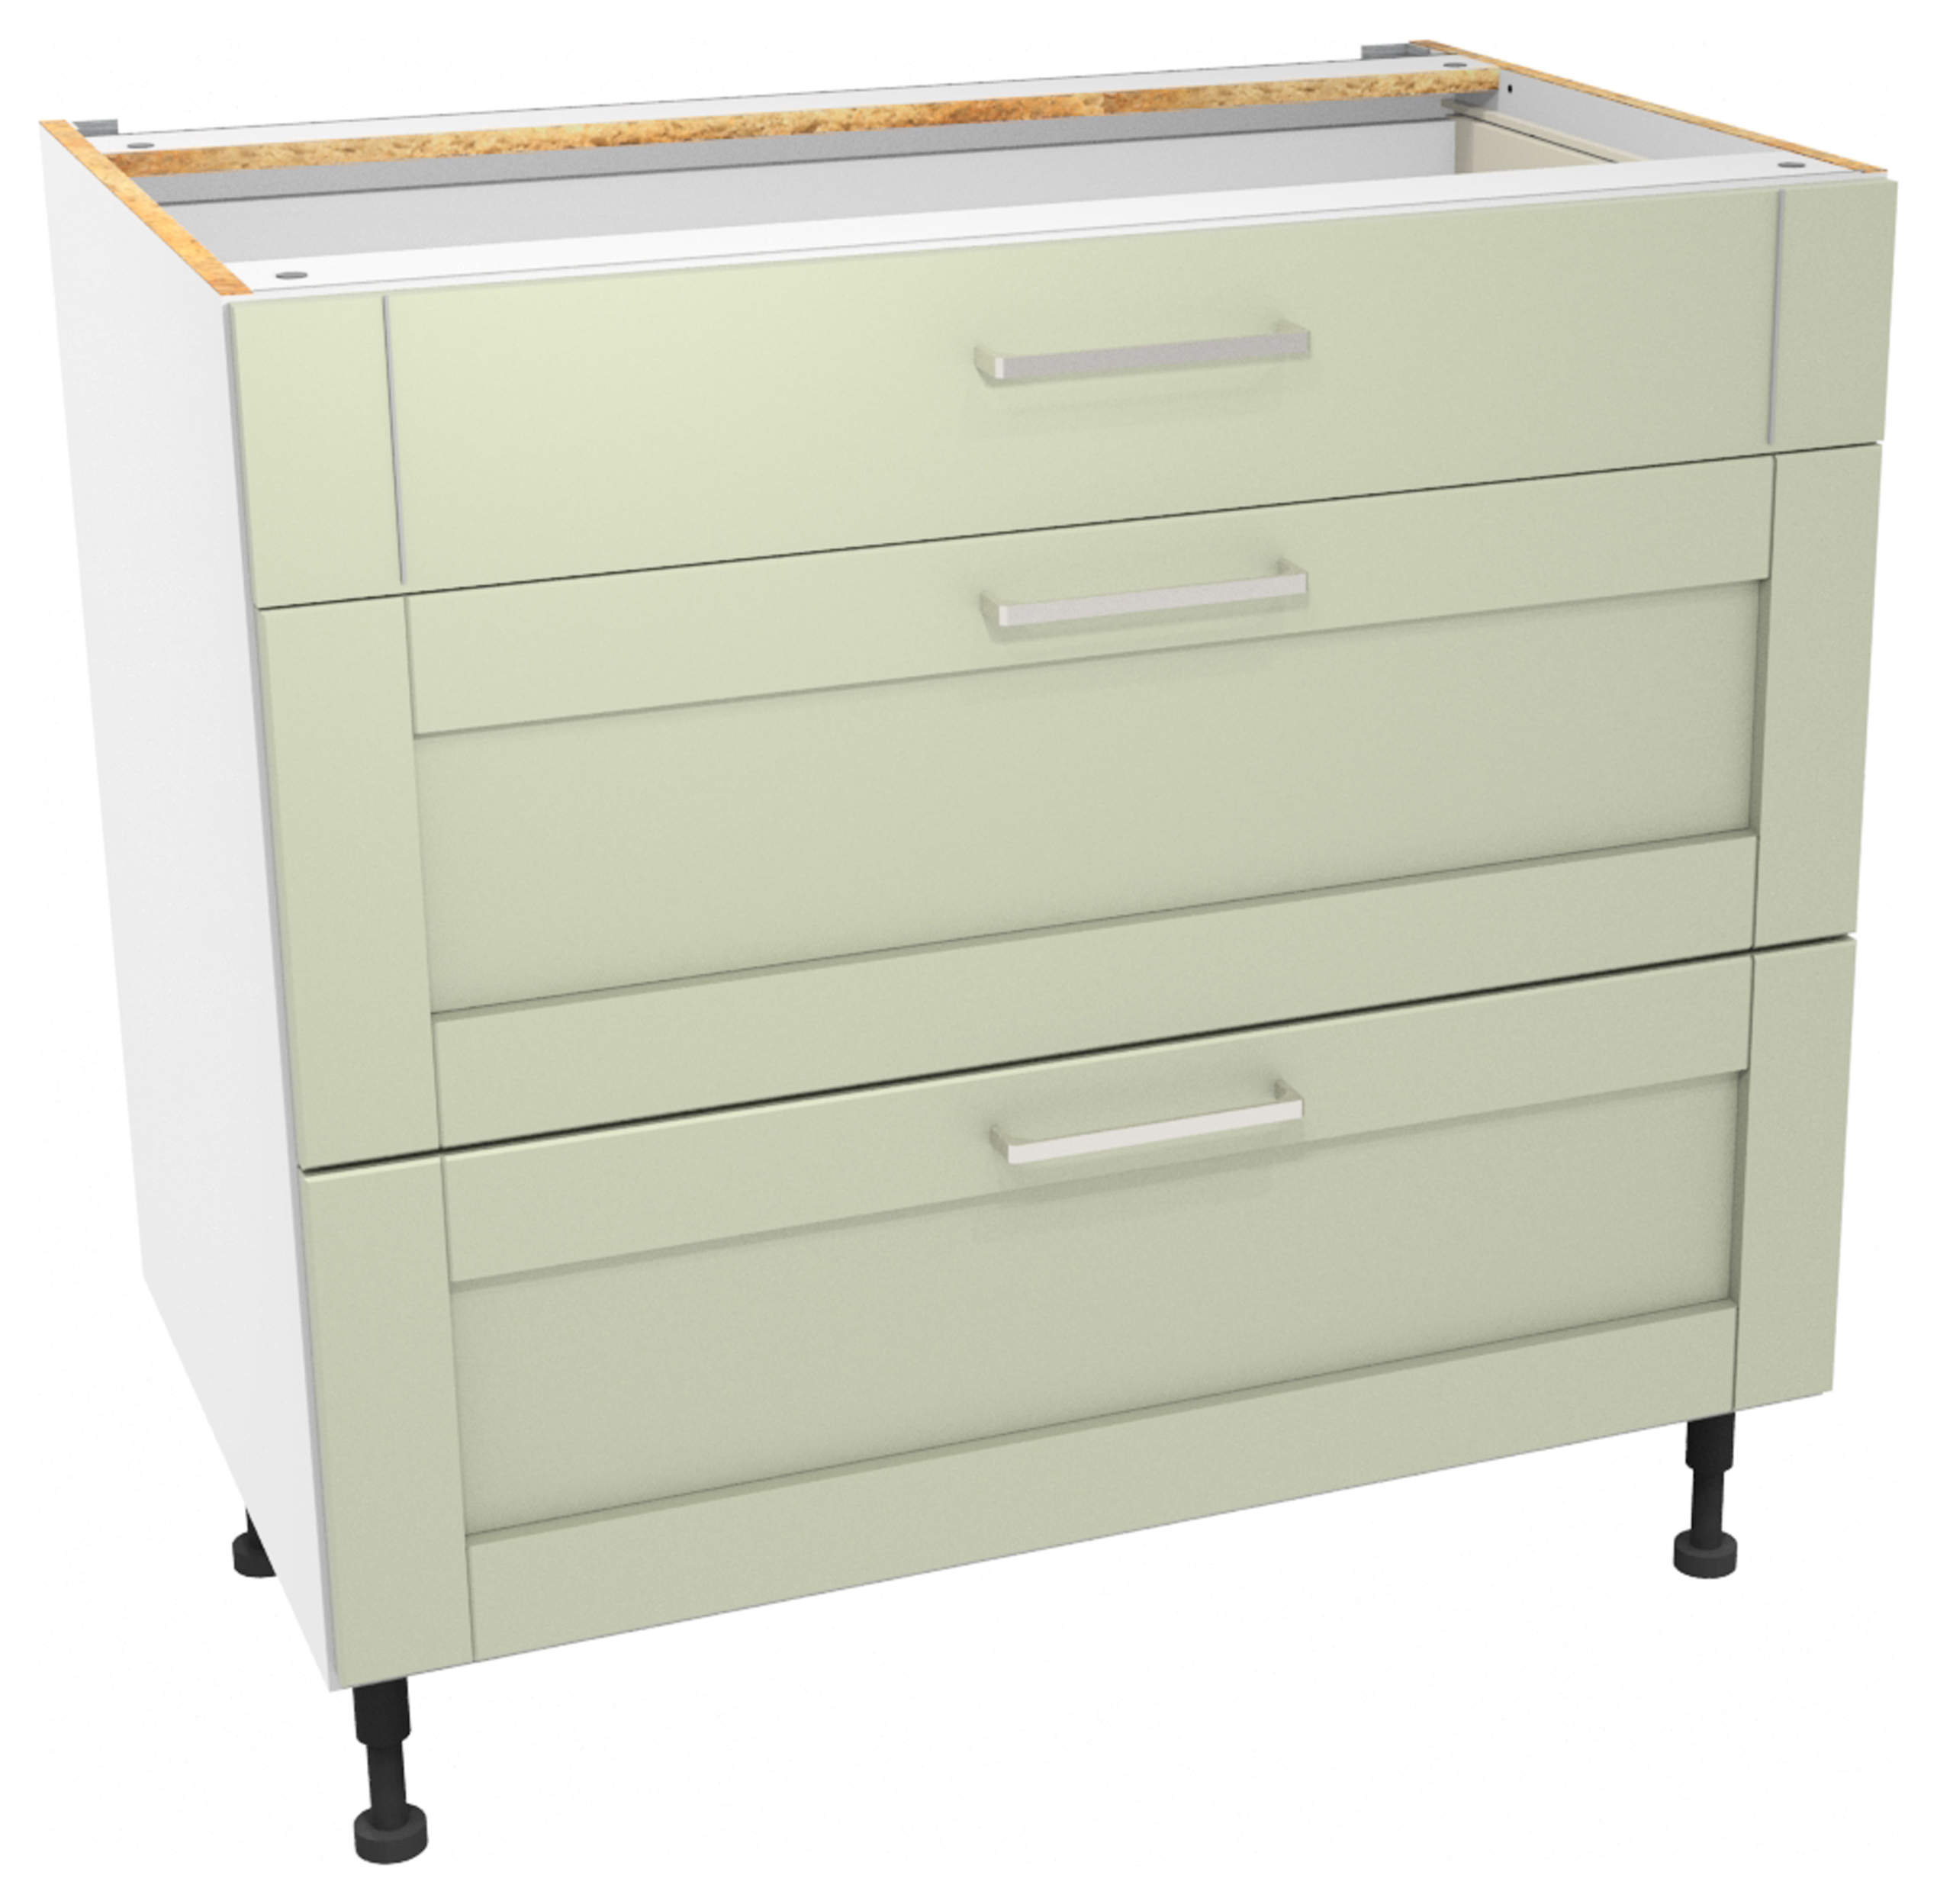 Image of Wickes Ohio Sage Shaker Drawer Unit - 900mm (Part 1 of 2)